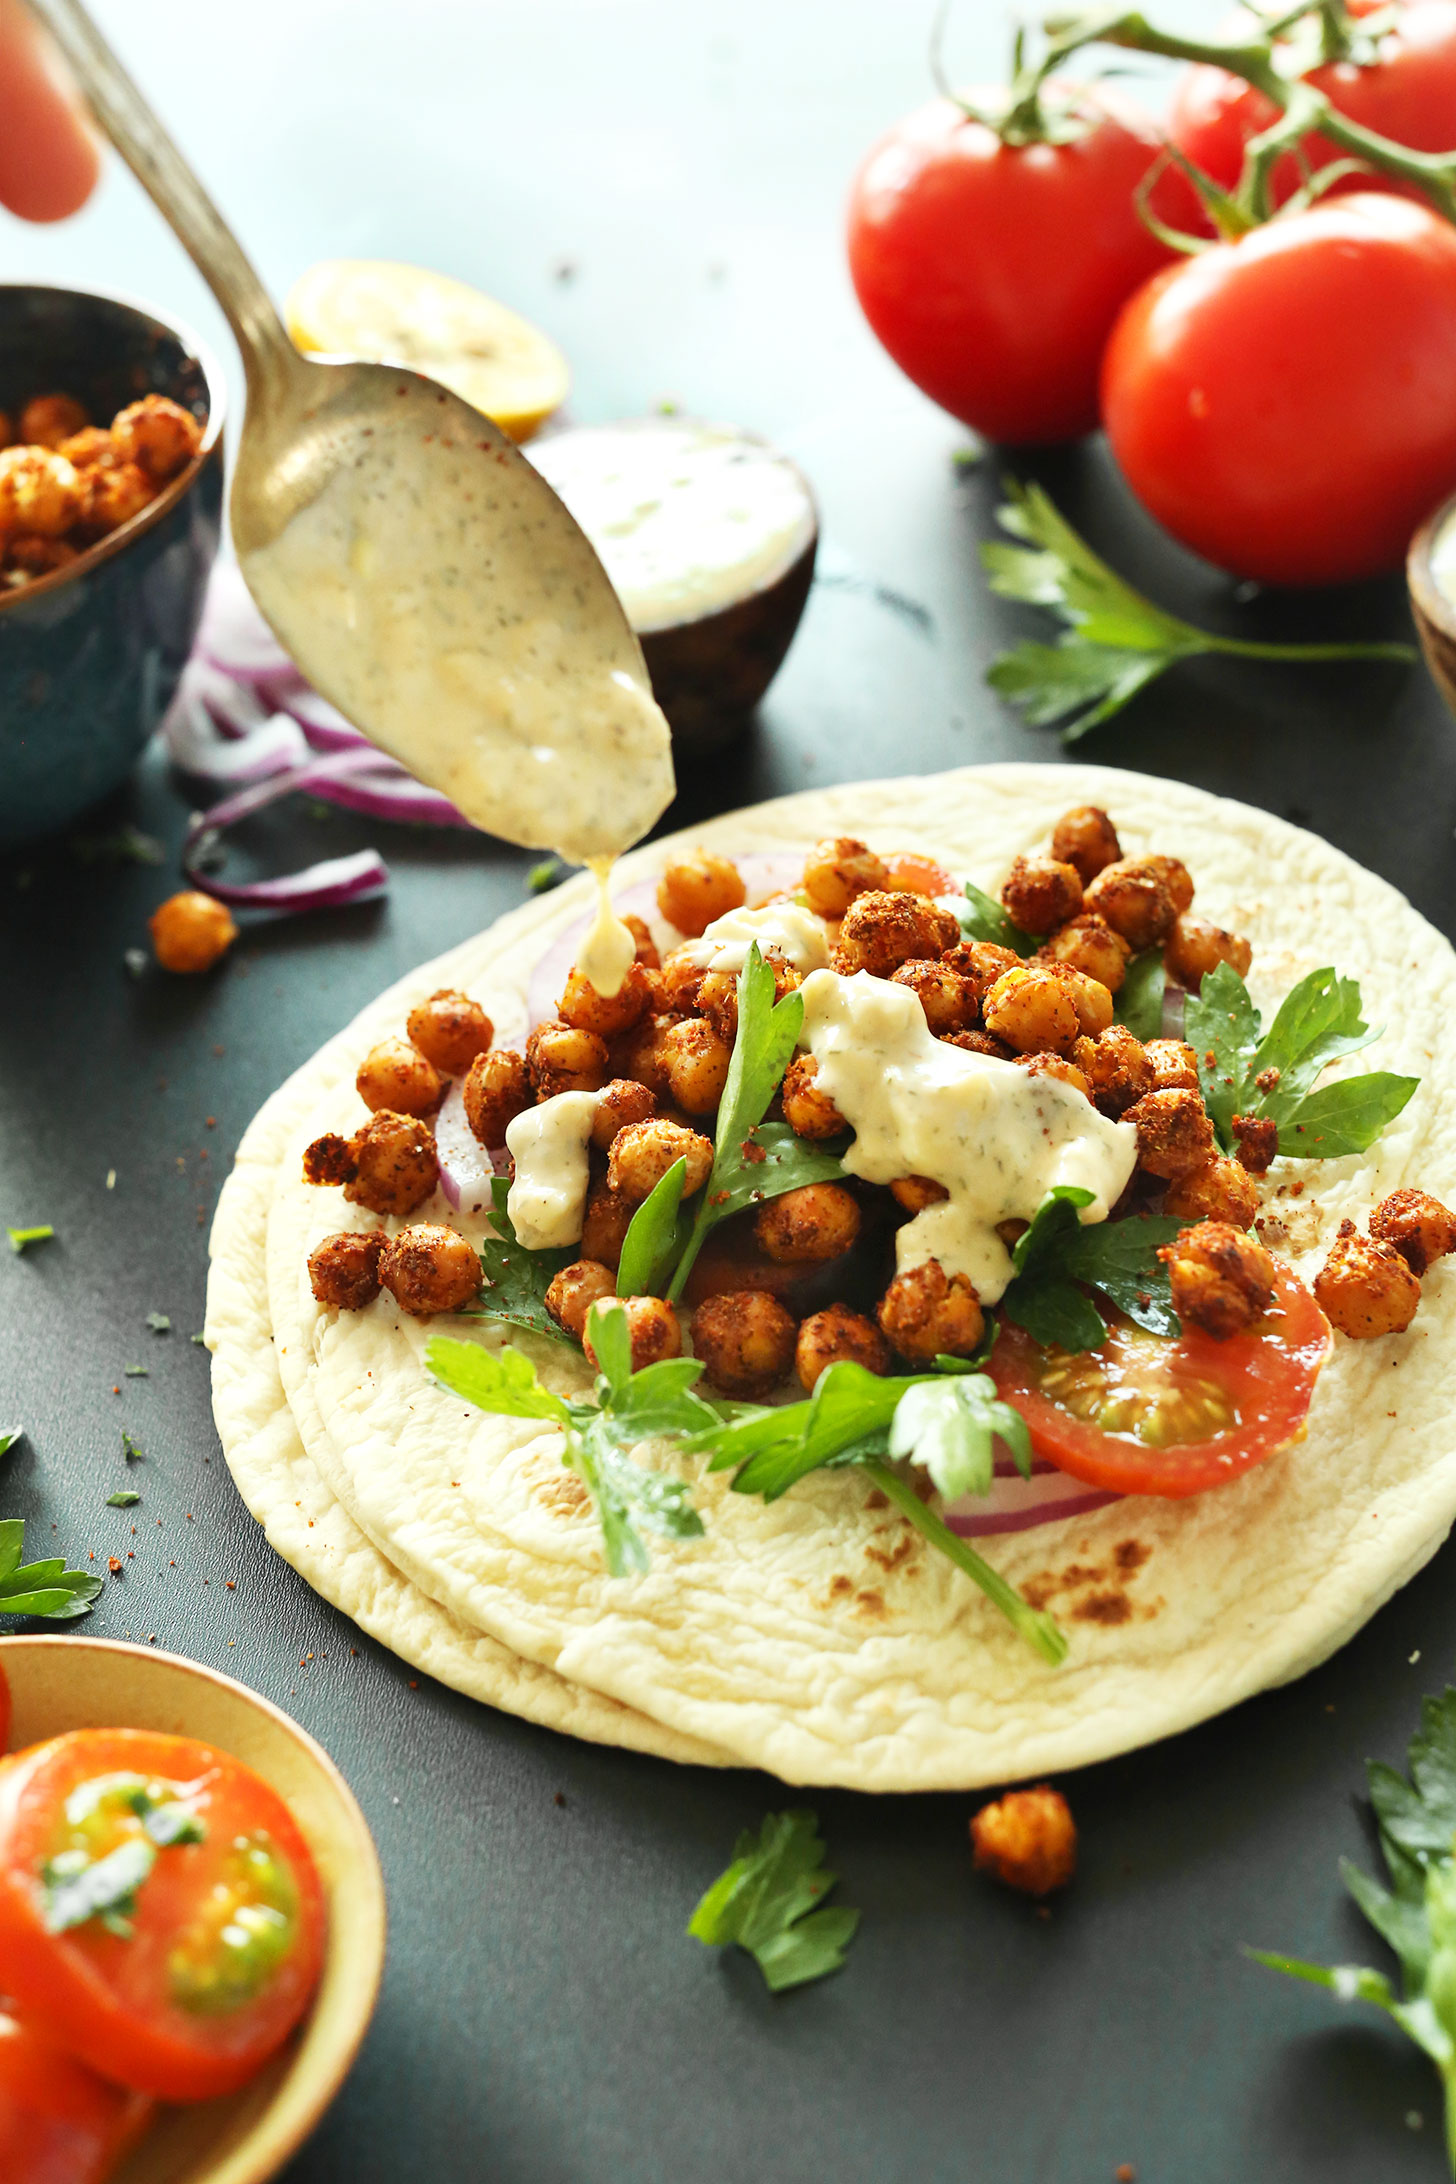 Drizzling Garlic Dill Sauce over Chickpea Shawarma Wraps for delicious vegan flavor